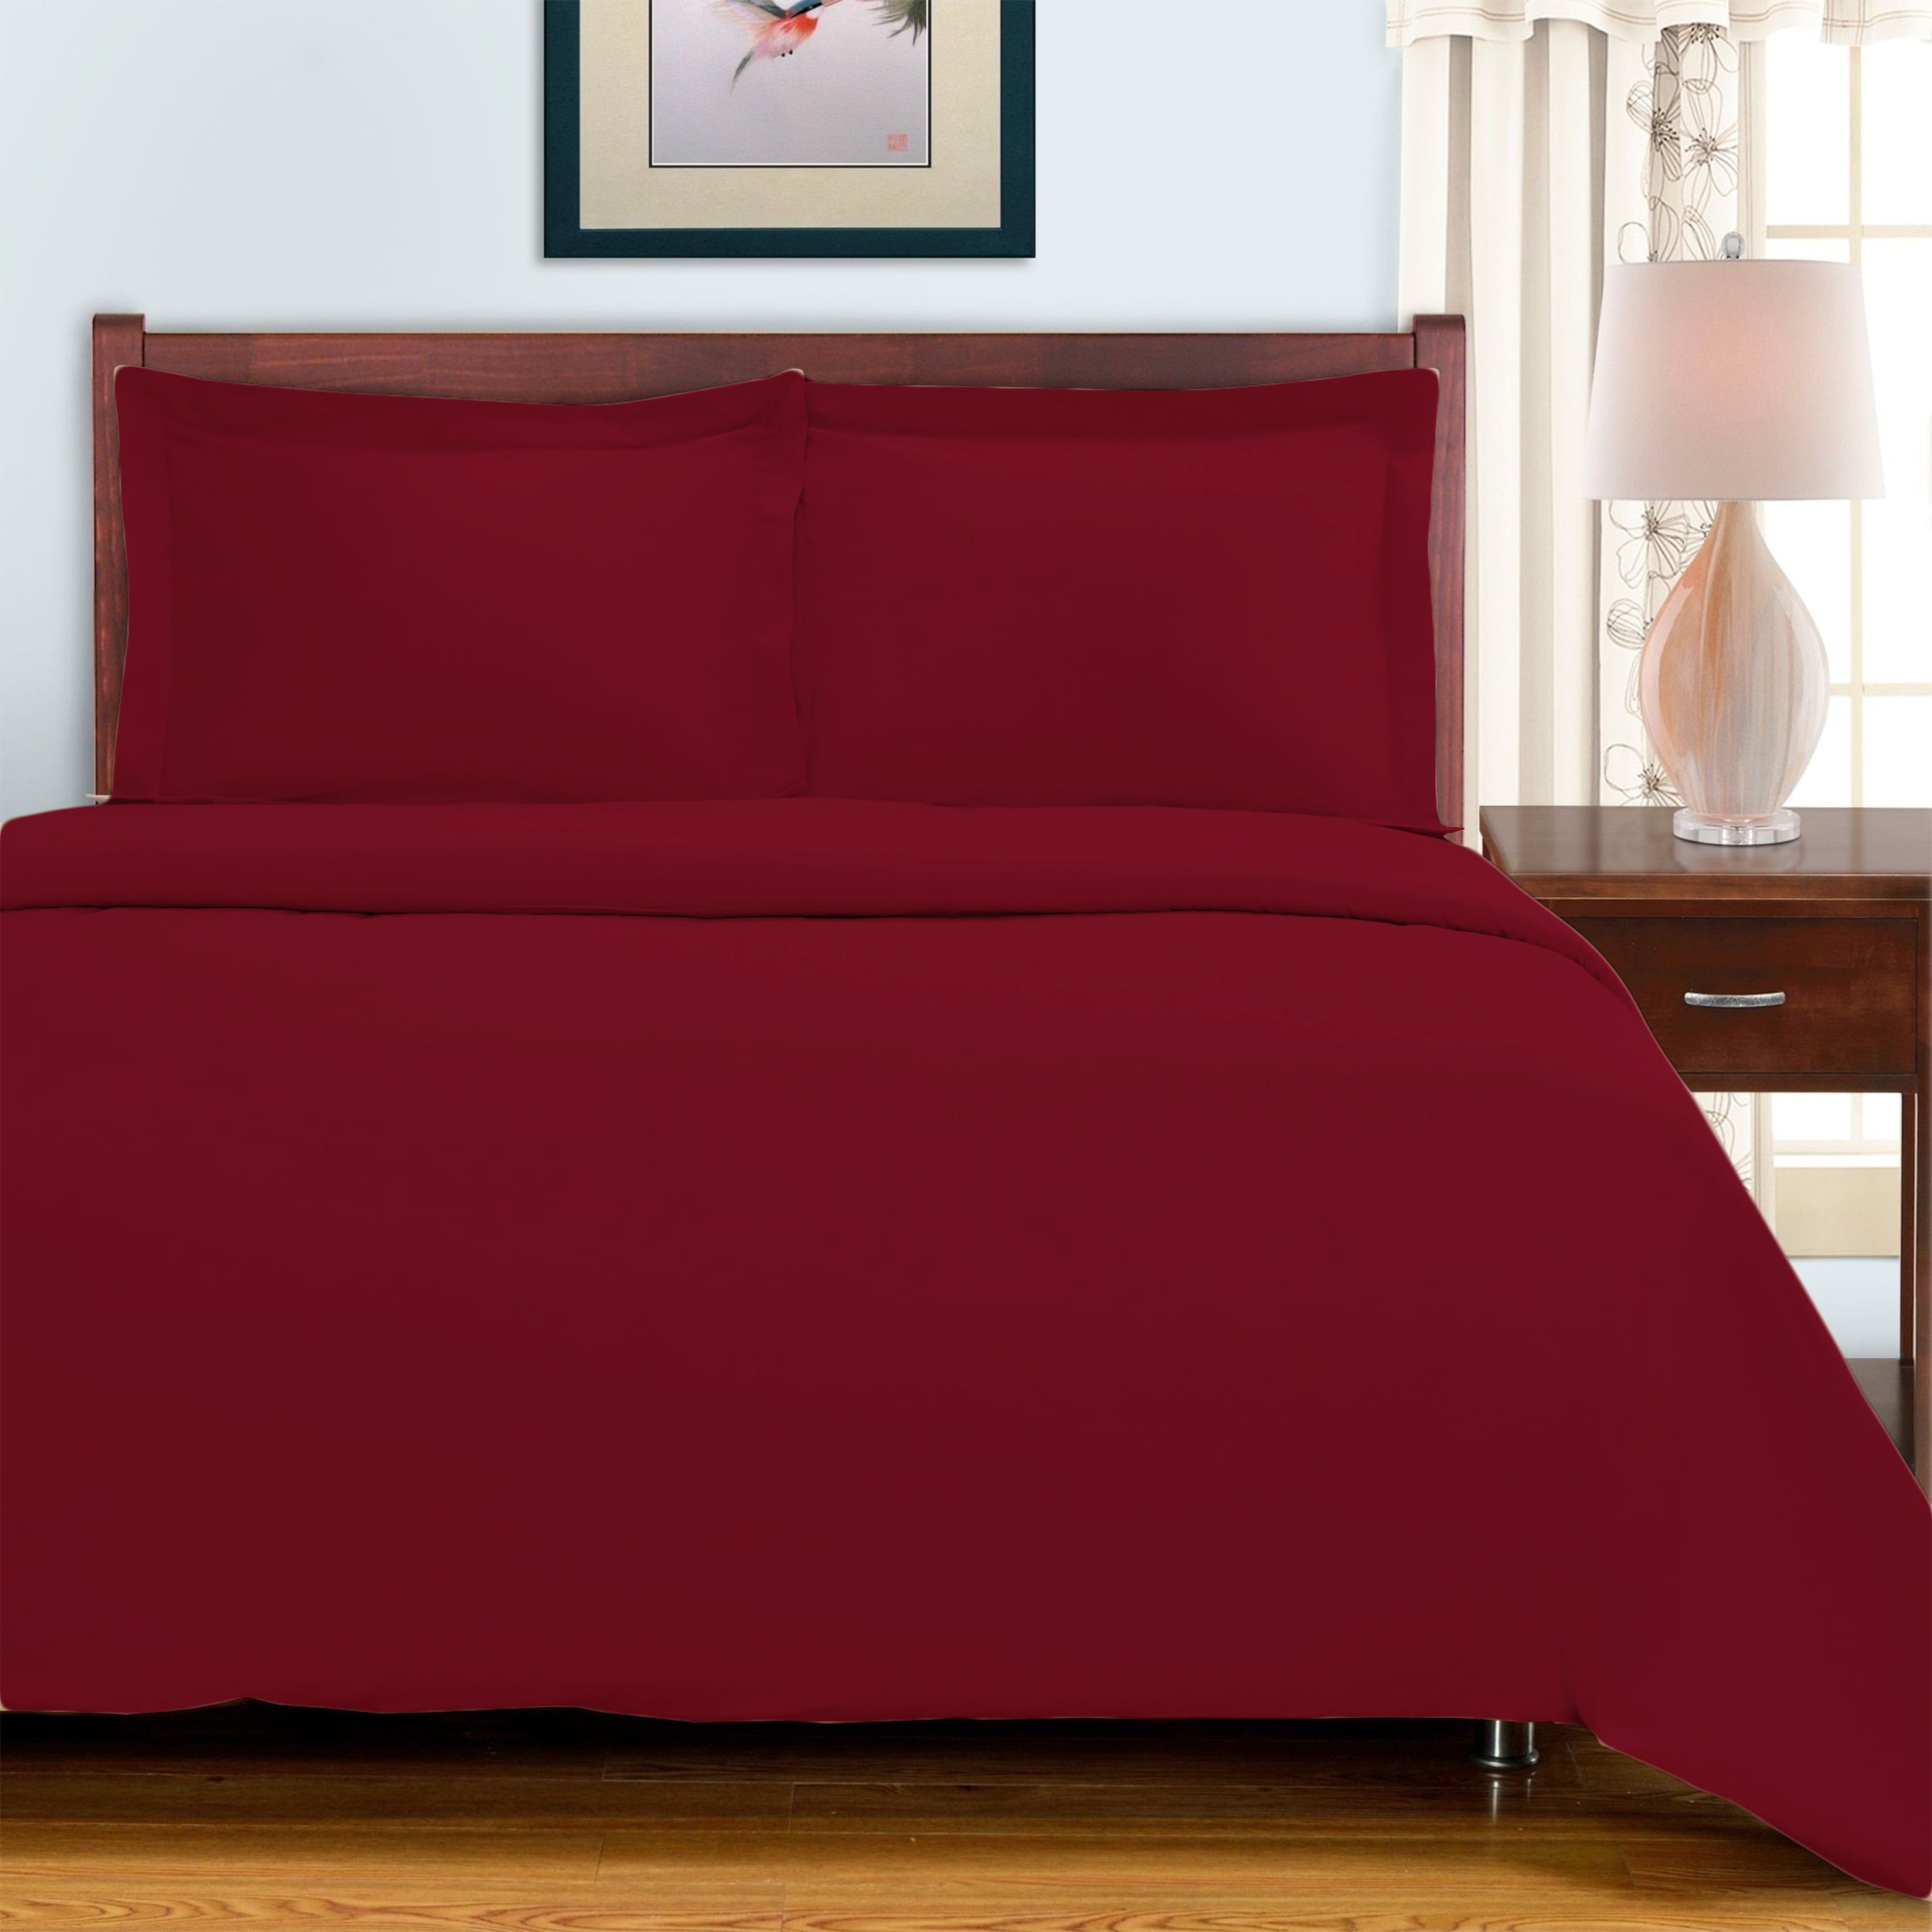 Details about   1000 Thread Count Egyptian Cotton Premium Bedding Items RV King Size Solid 